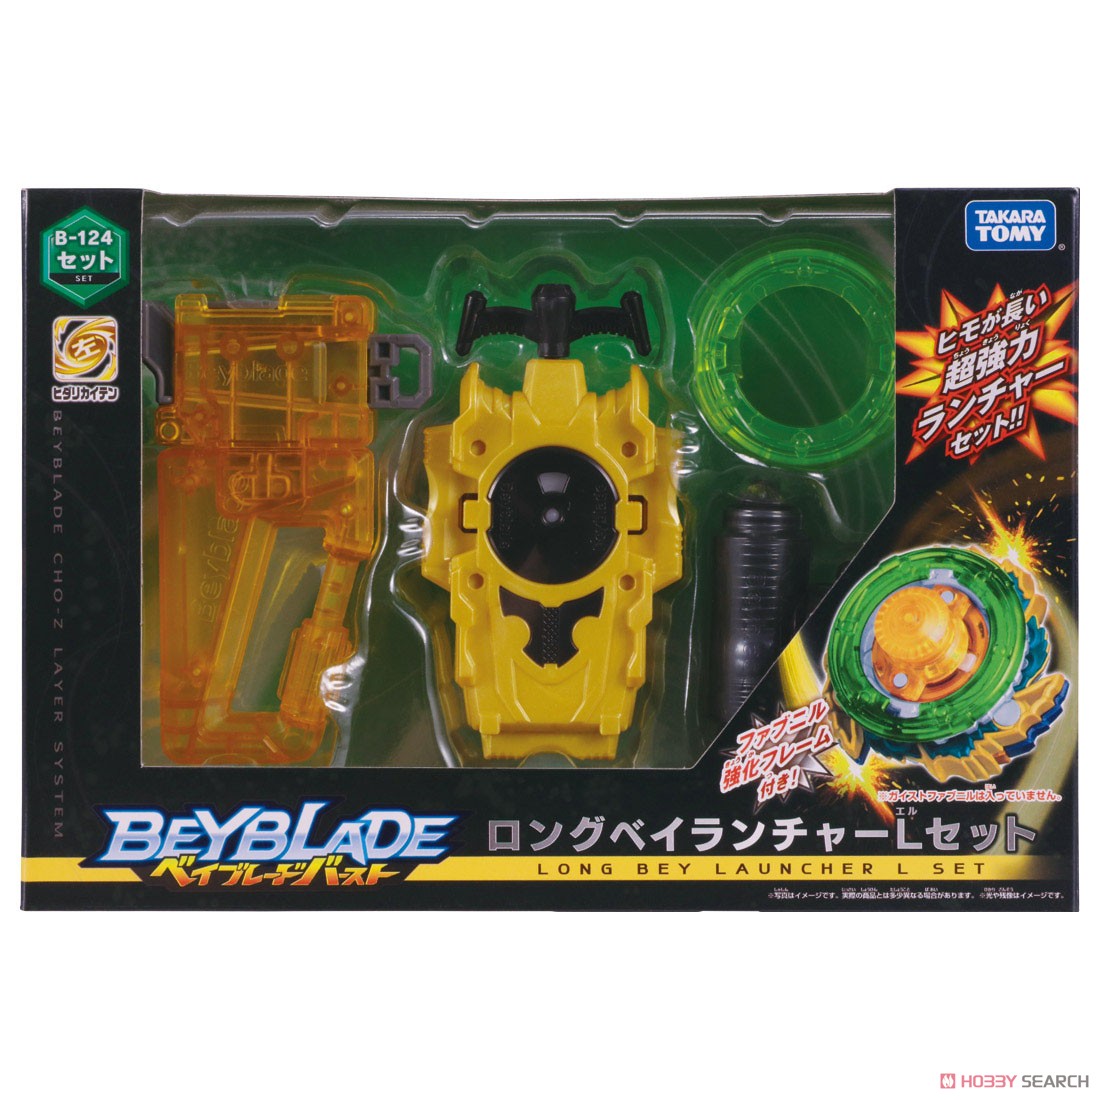 Beyblade Burst B-124 Long Bey Launcher L Set (Active Toy) Package2